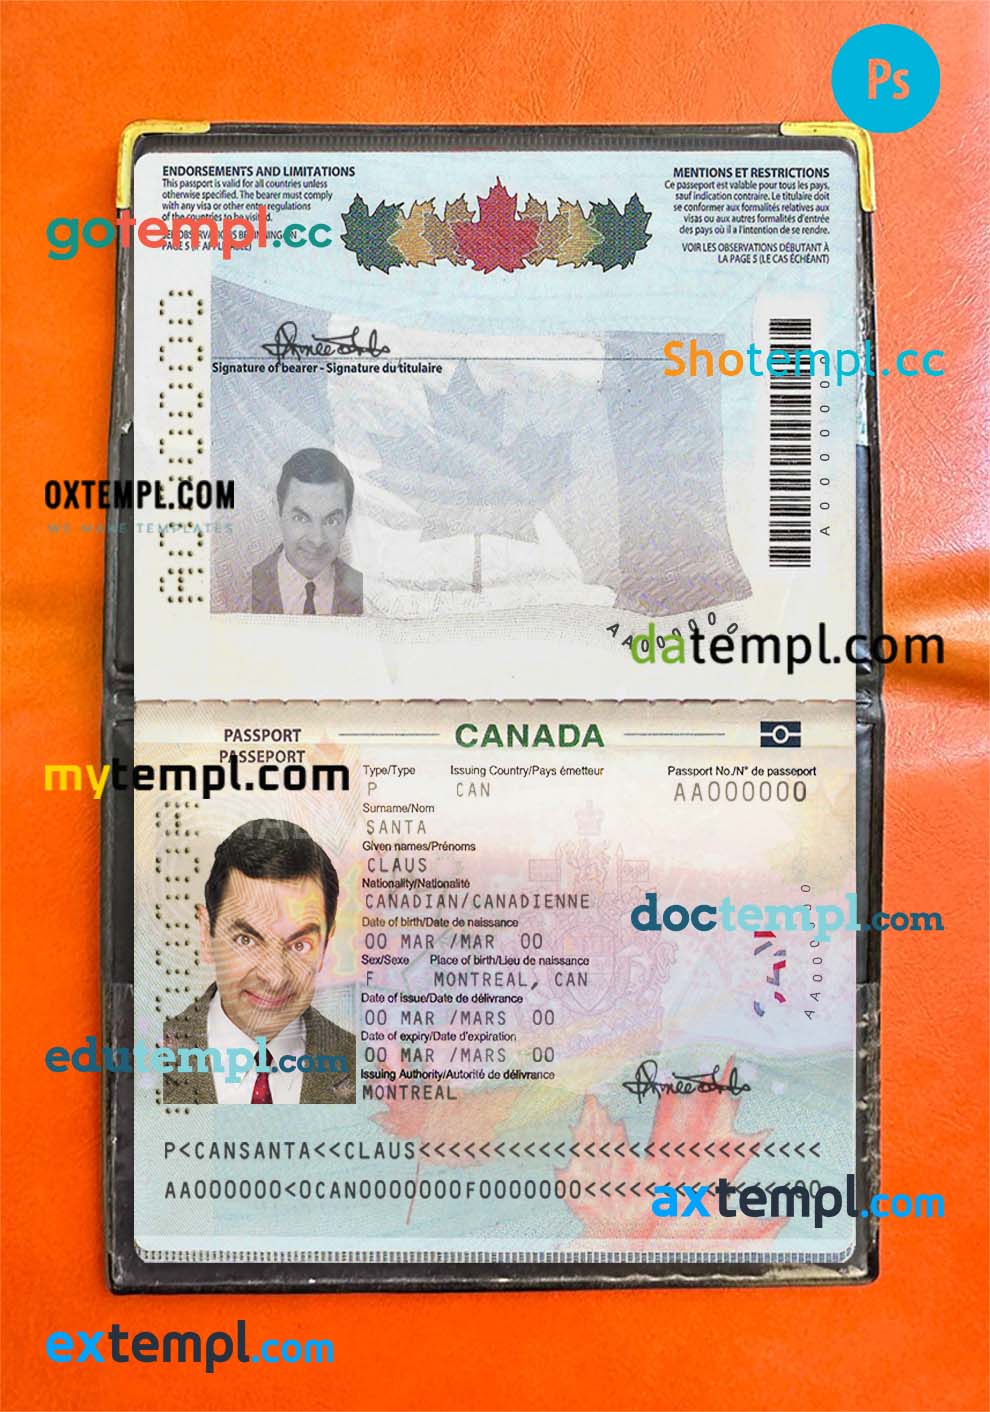 Canada passport editable PSD files, scan and photo taken image (2010-present), 2 in 1